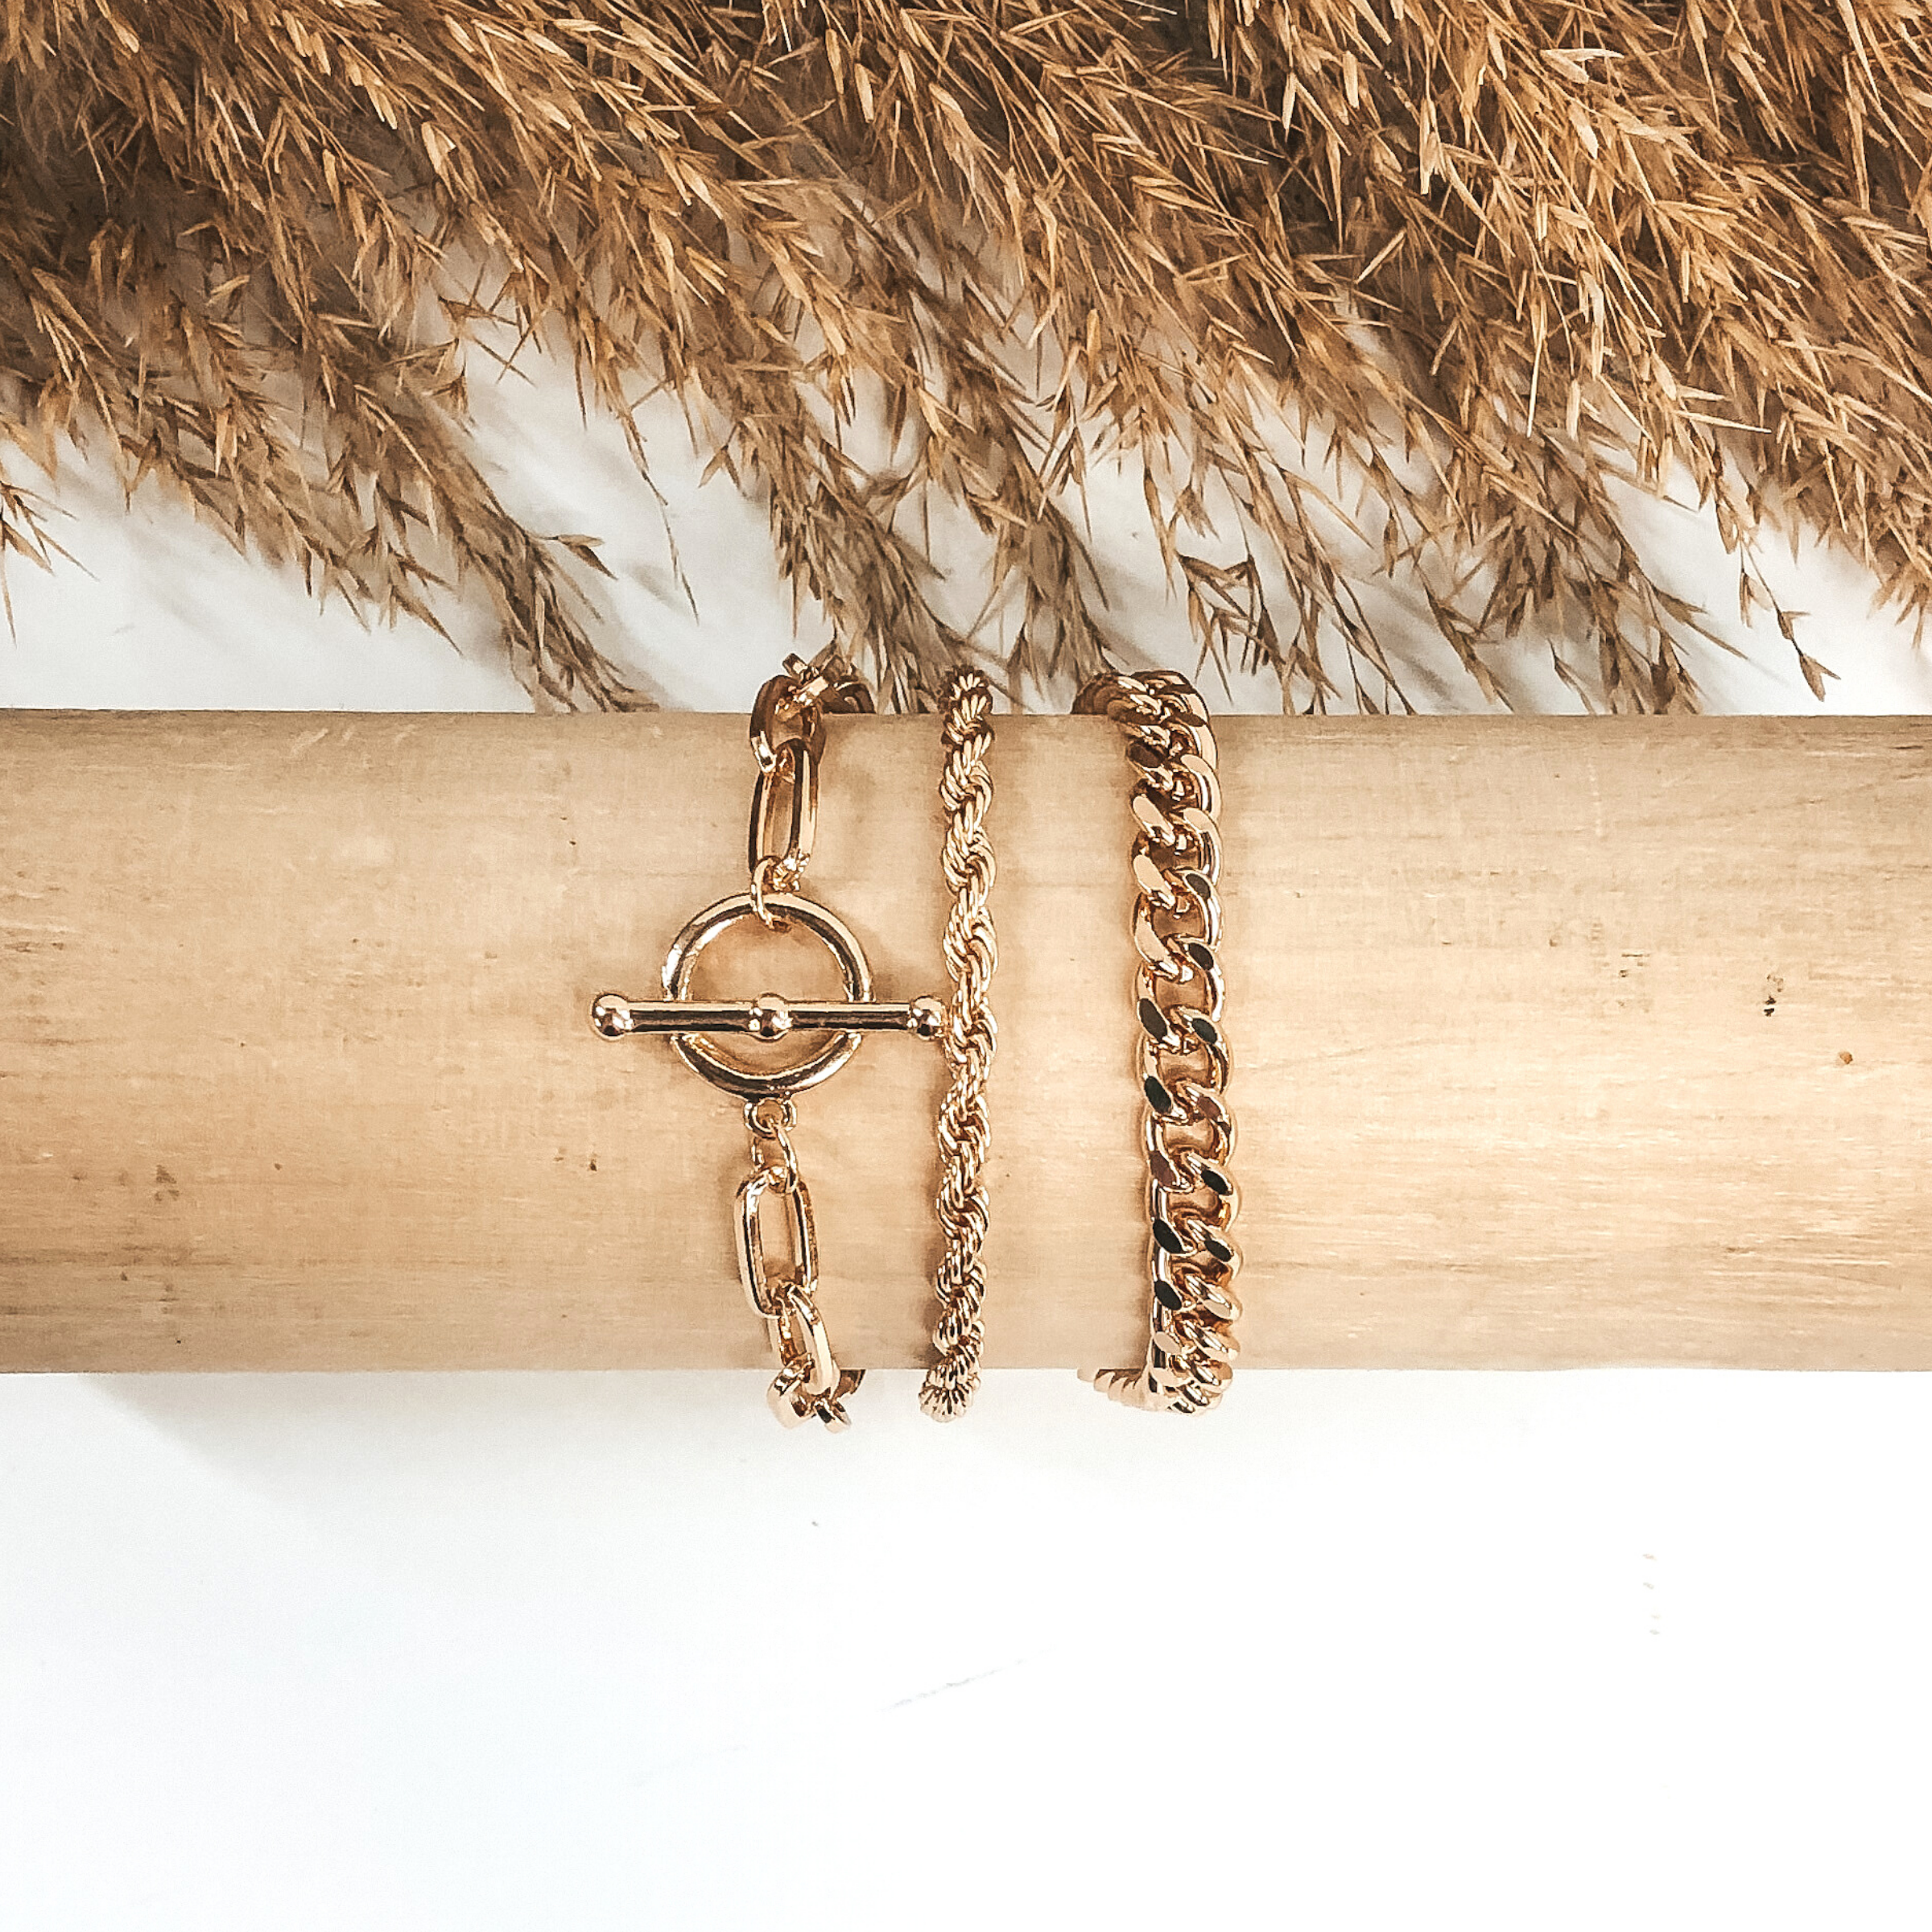 This is a three stranded gold, magnetic bracelet that includes a curb chain, a rope chain, and a paperclip chain with a toggle clasp pendant. This bracelet is pictured wrapped around a wooden bracelet holder on a white background with tan floral at the top of the picture. 